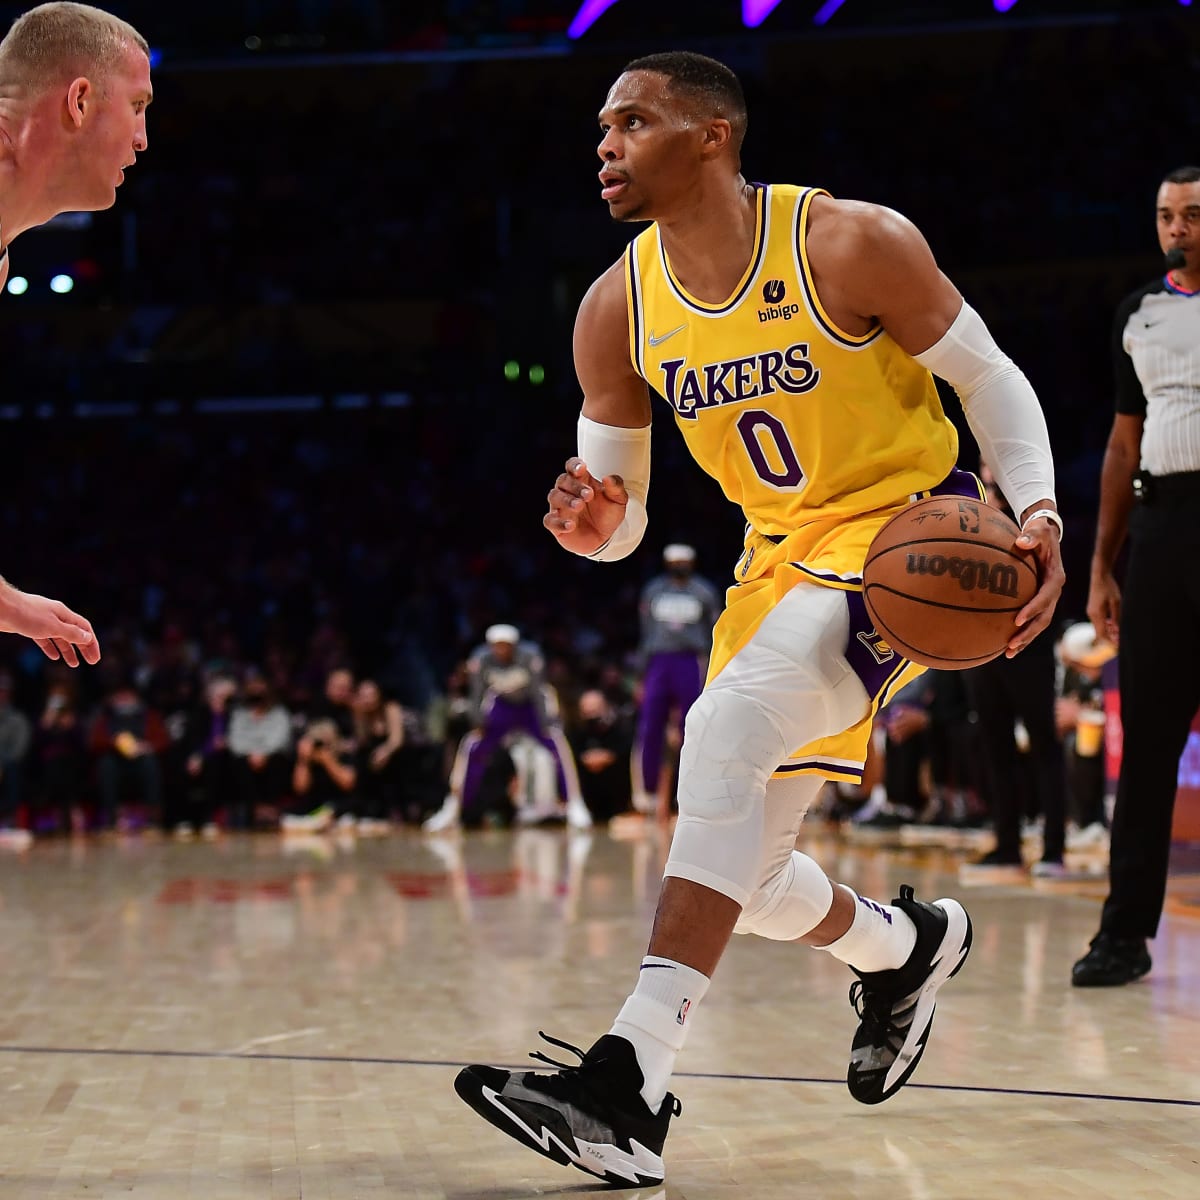 3 potential Russell Westbrook trades that could save Lakers